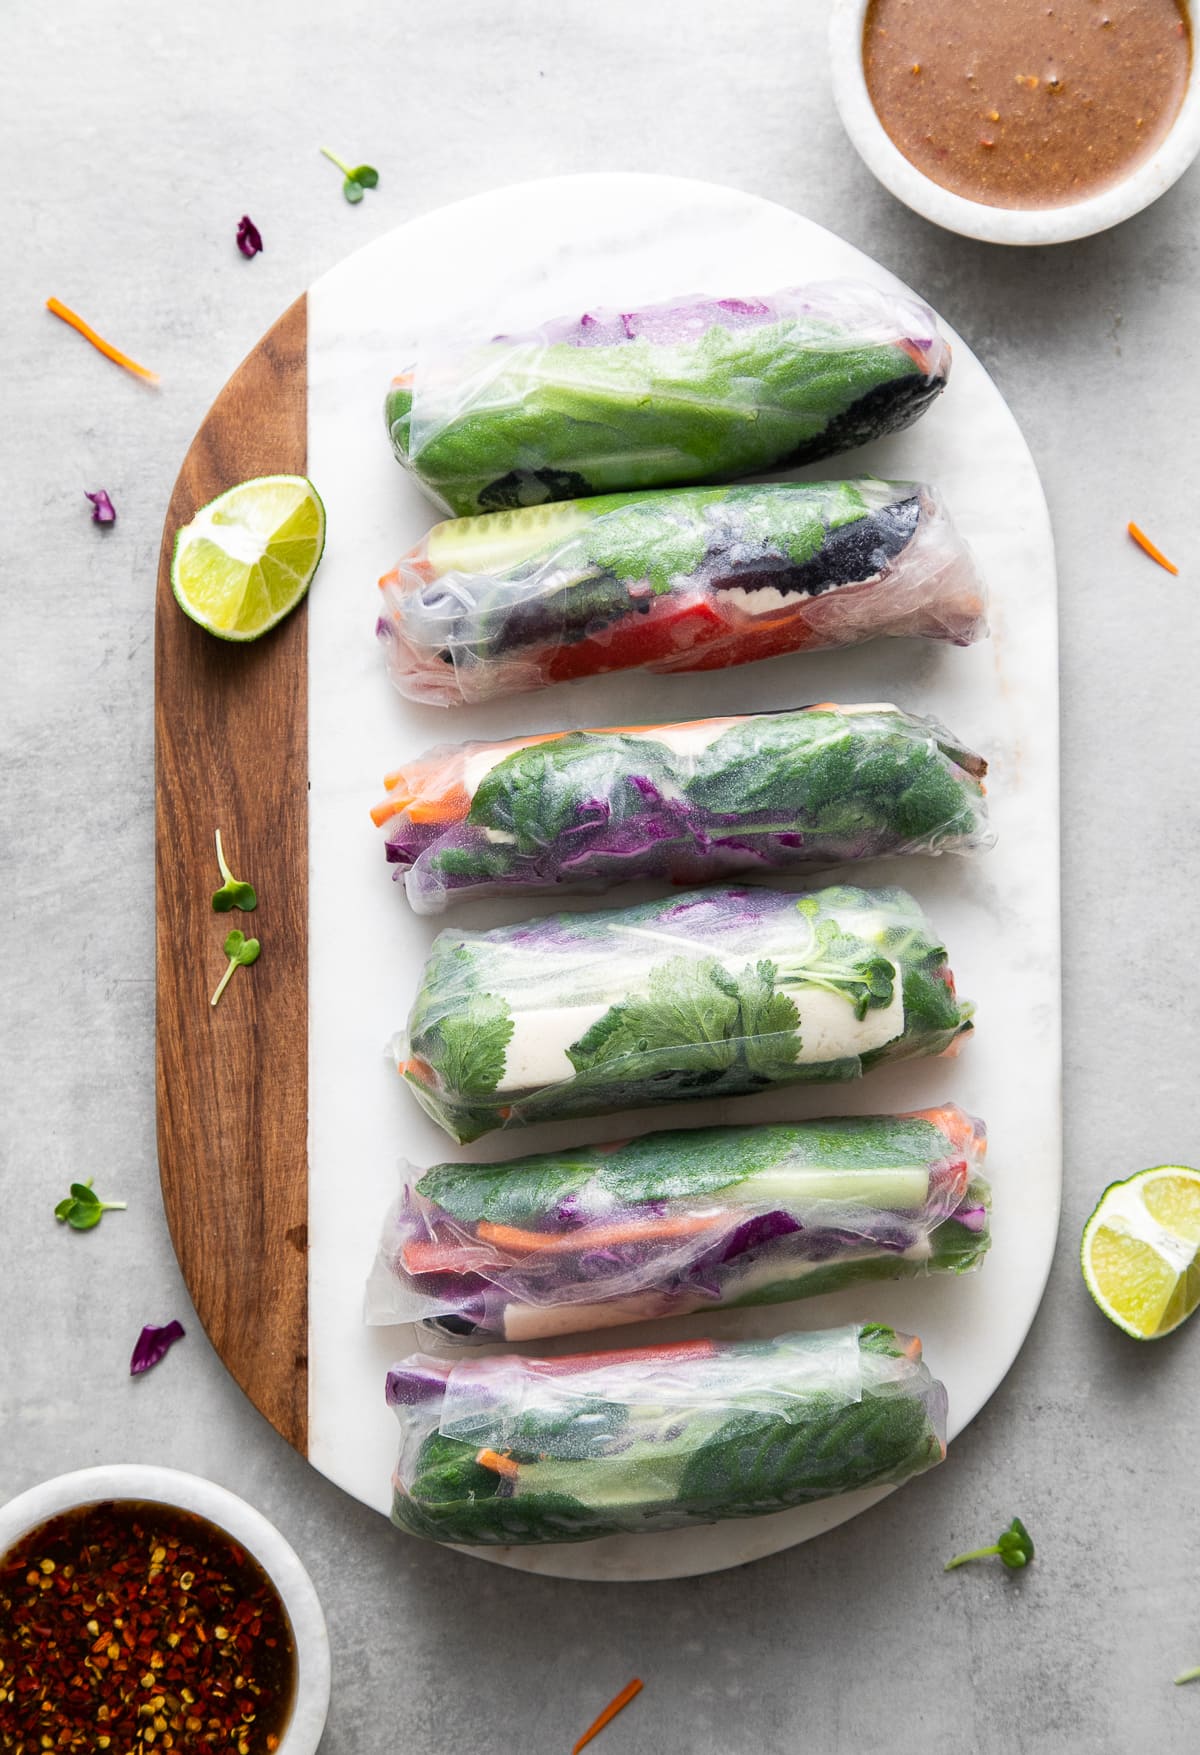 Summer Rolls + Two Dipping Sauces - The Simple Veganista